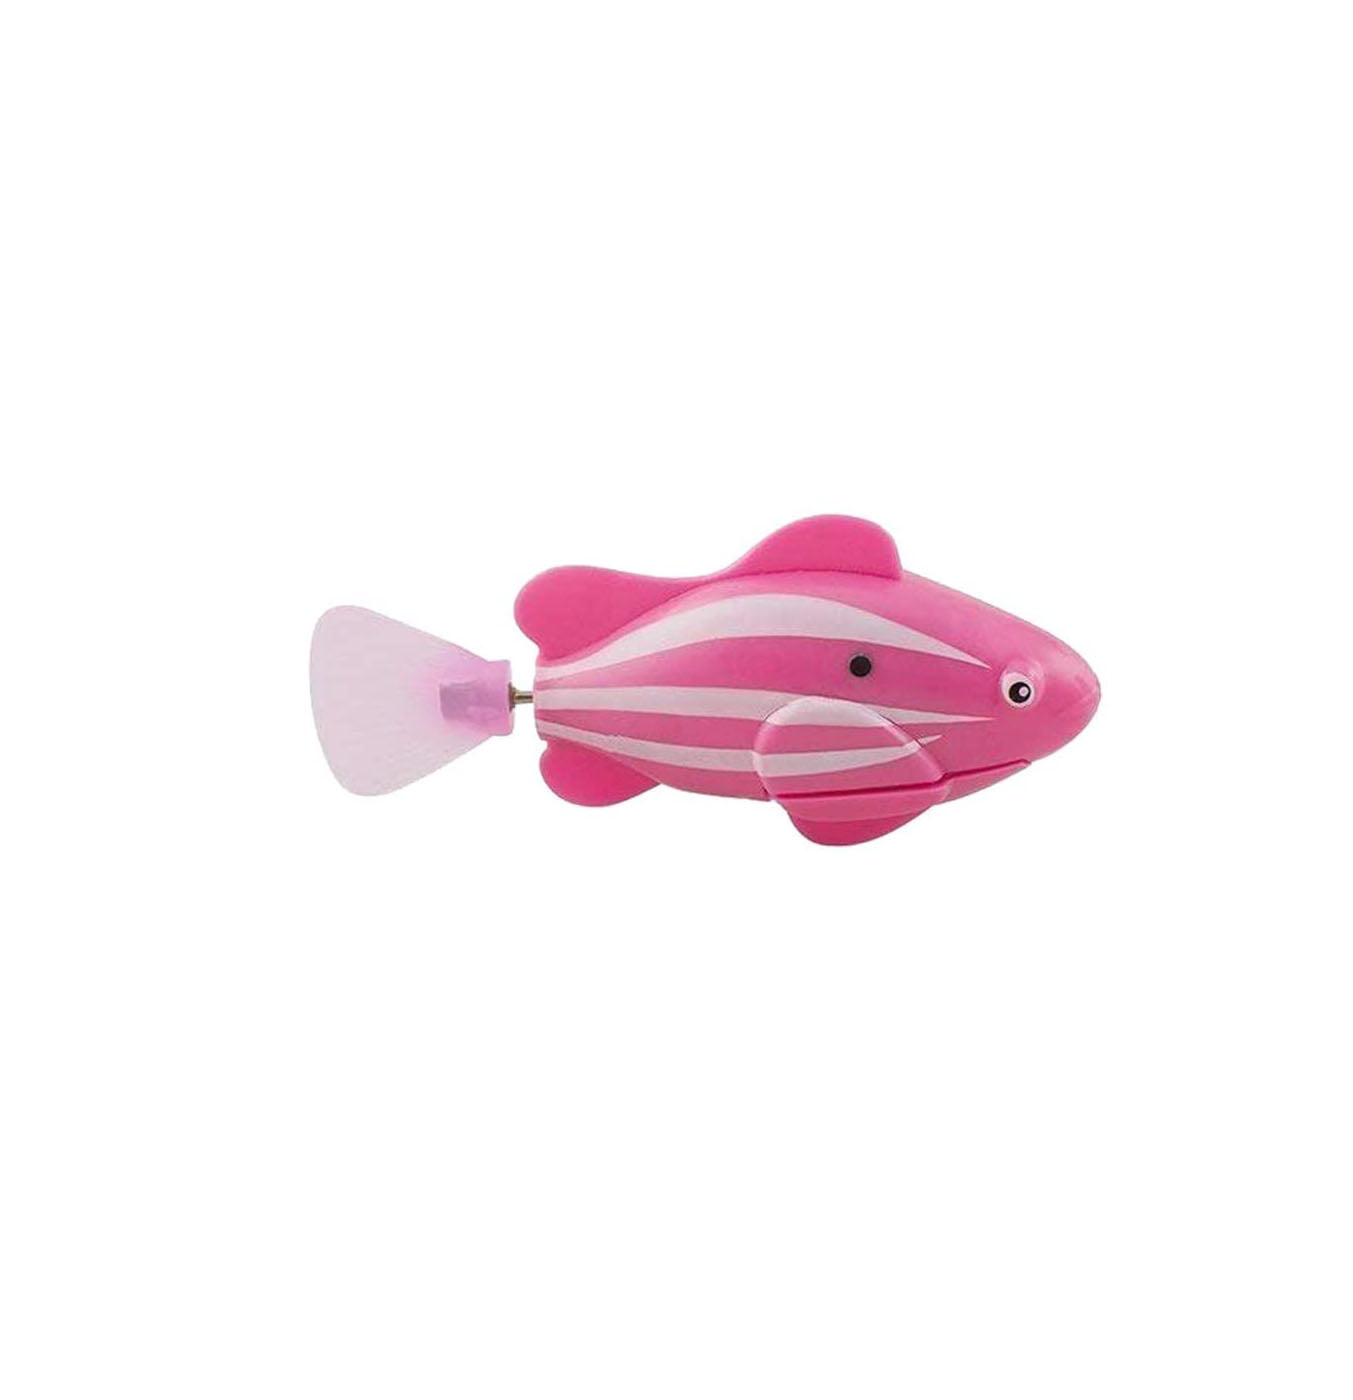 sewing tools and equipment clipart fish